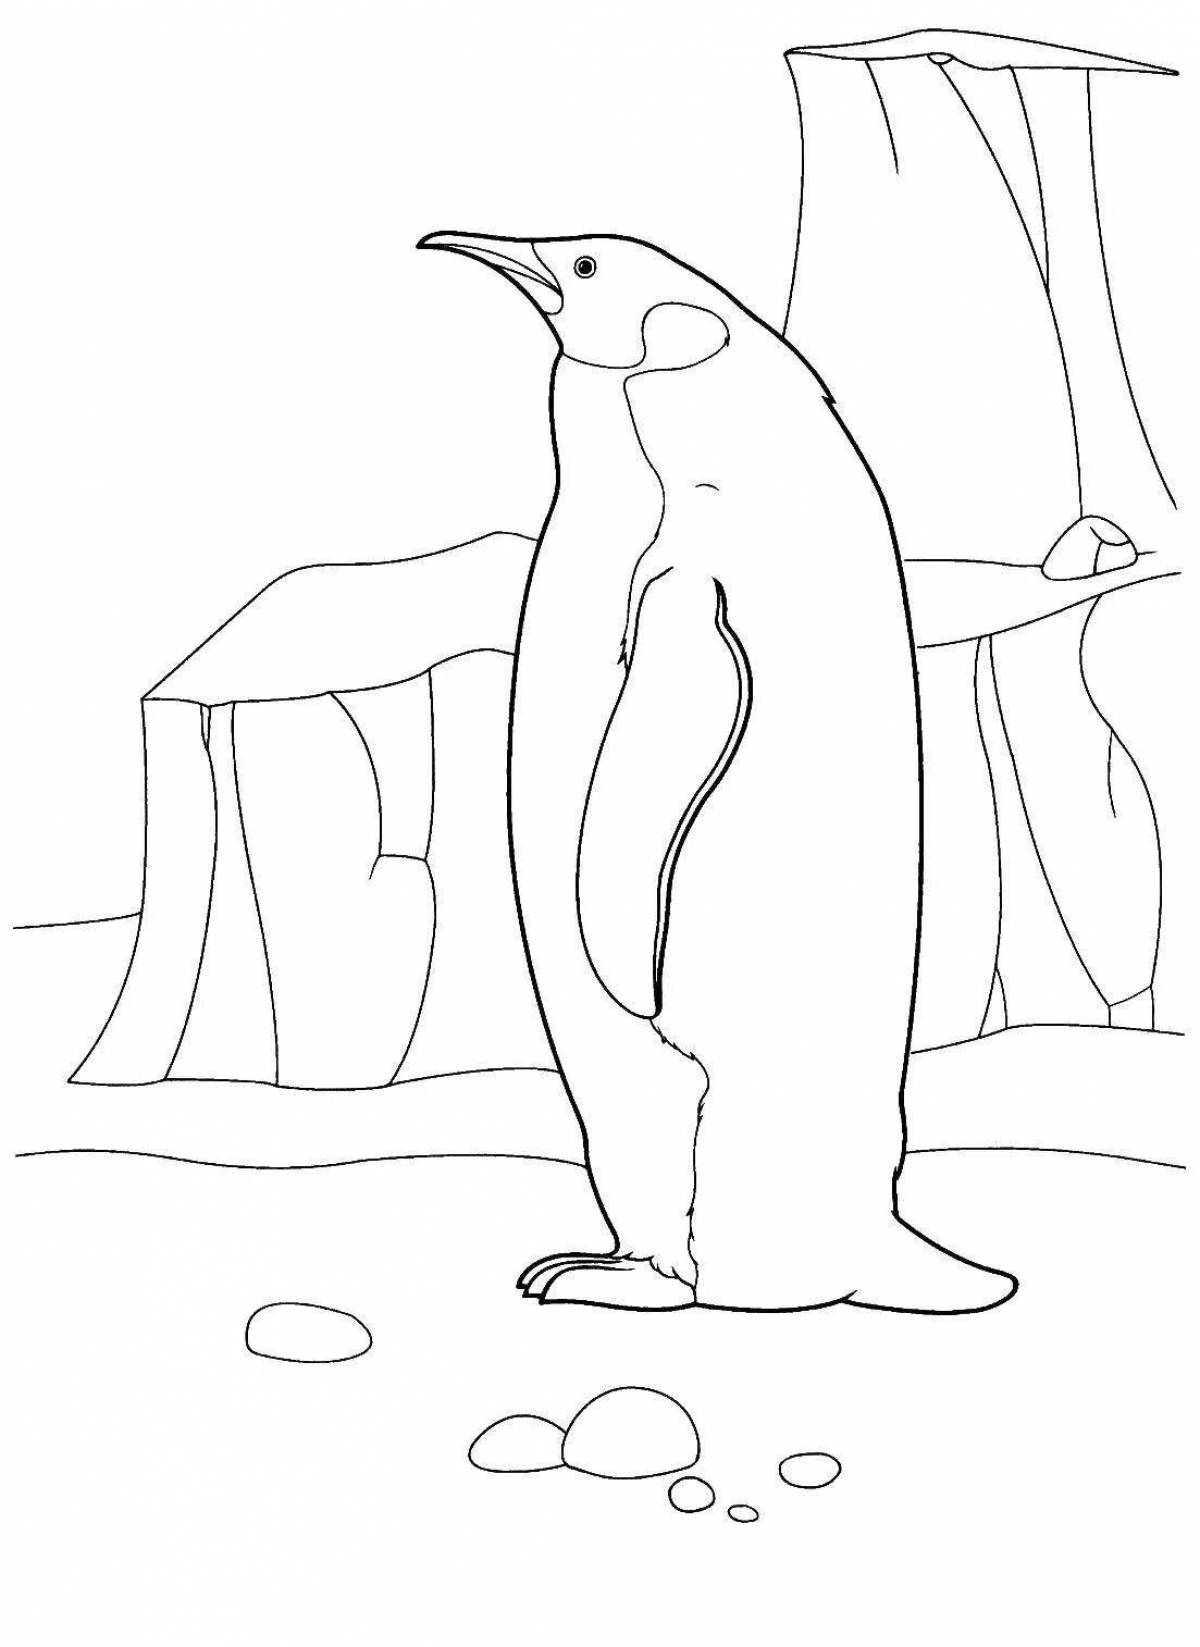 Coloring book shining penguin on ice